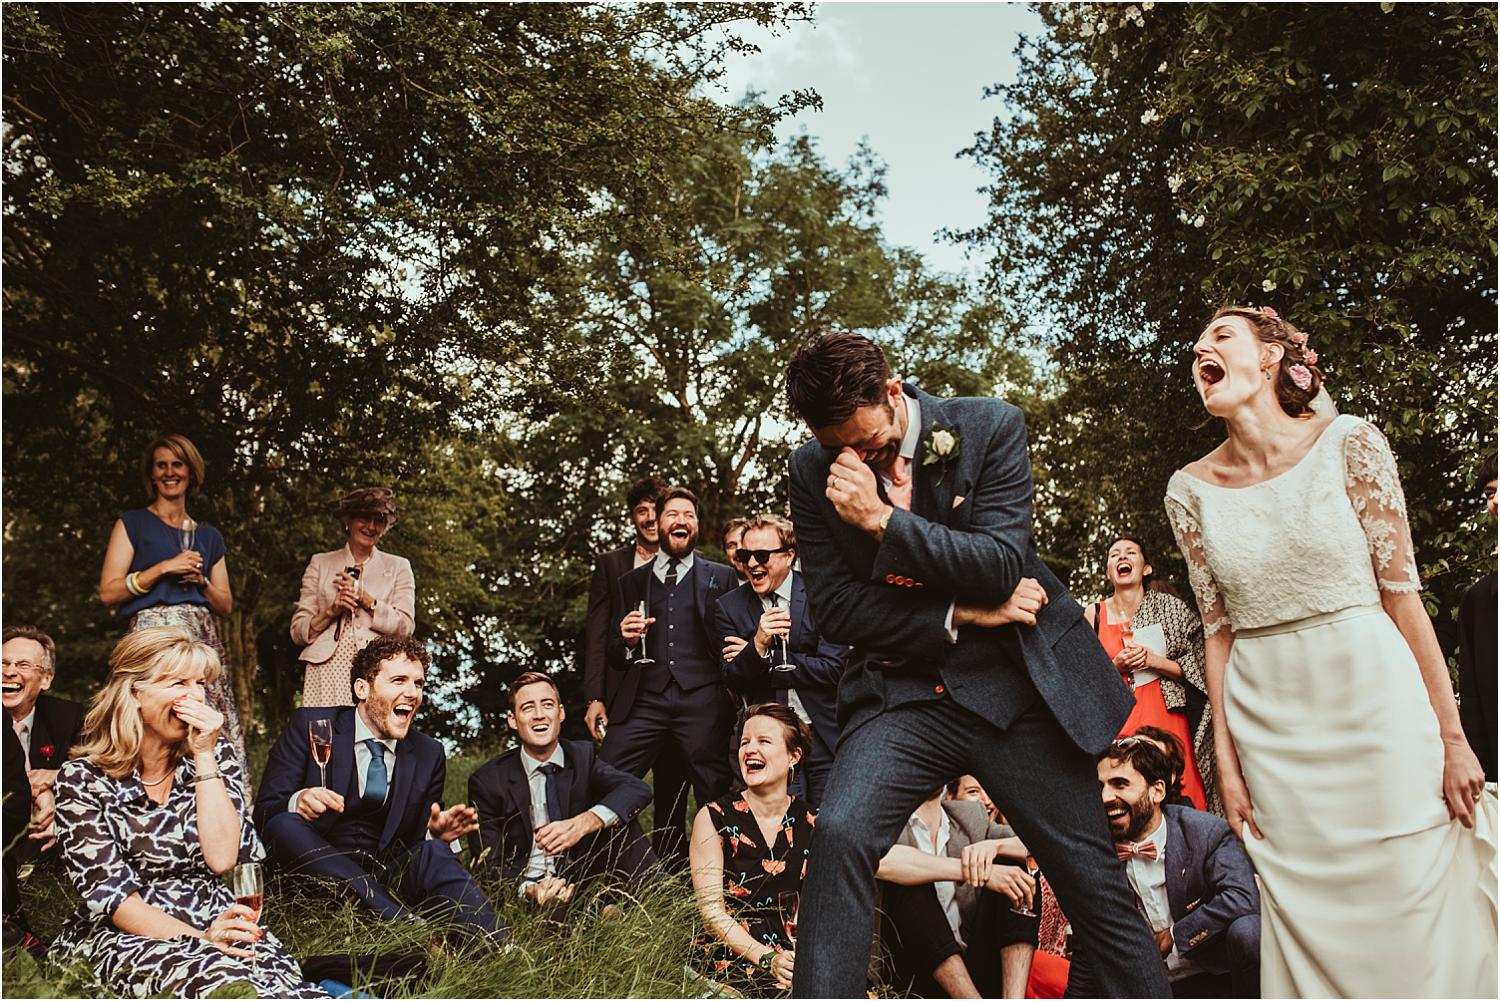 speeches at a festival themed wedding